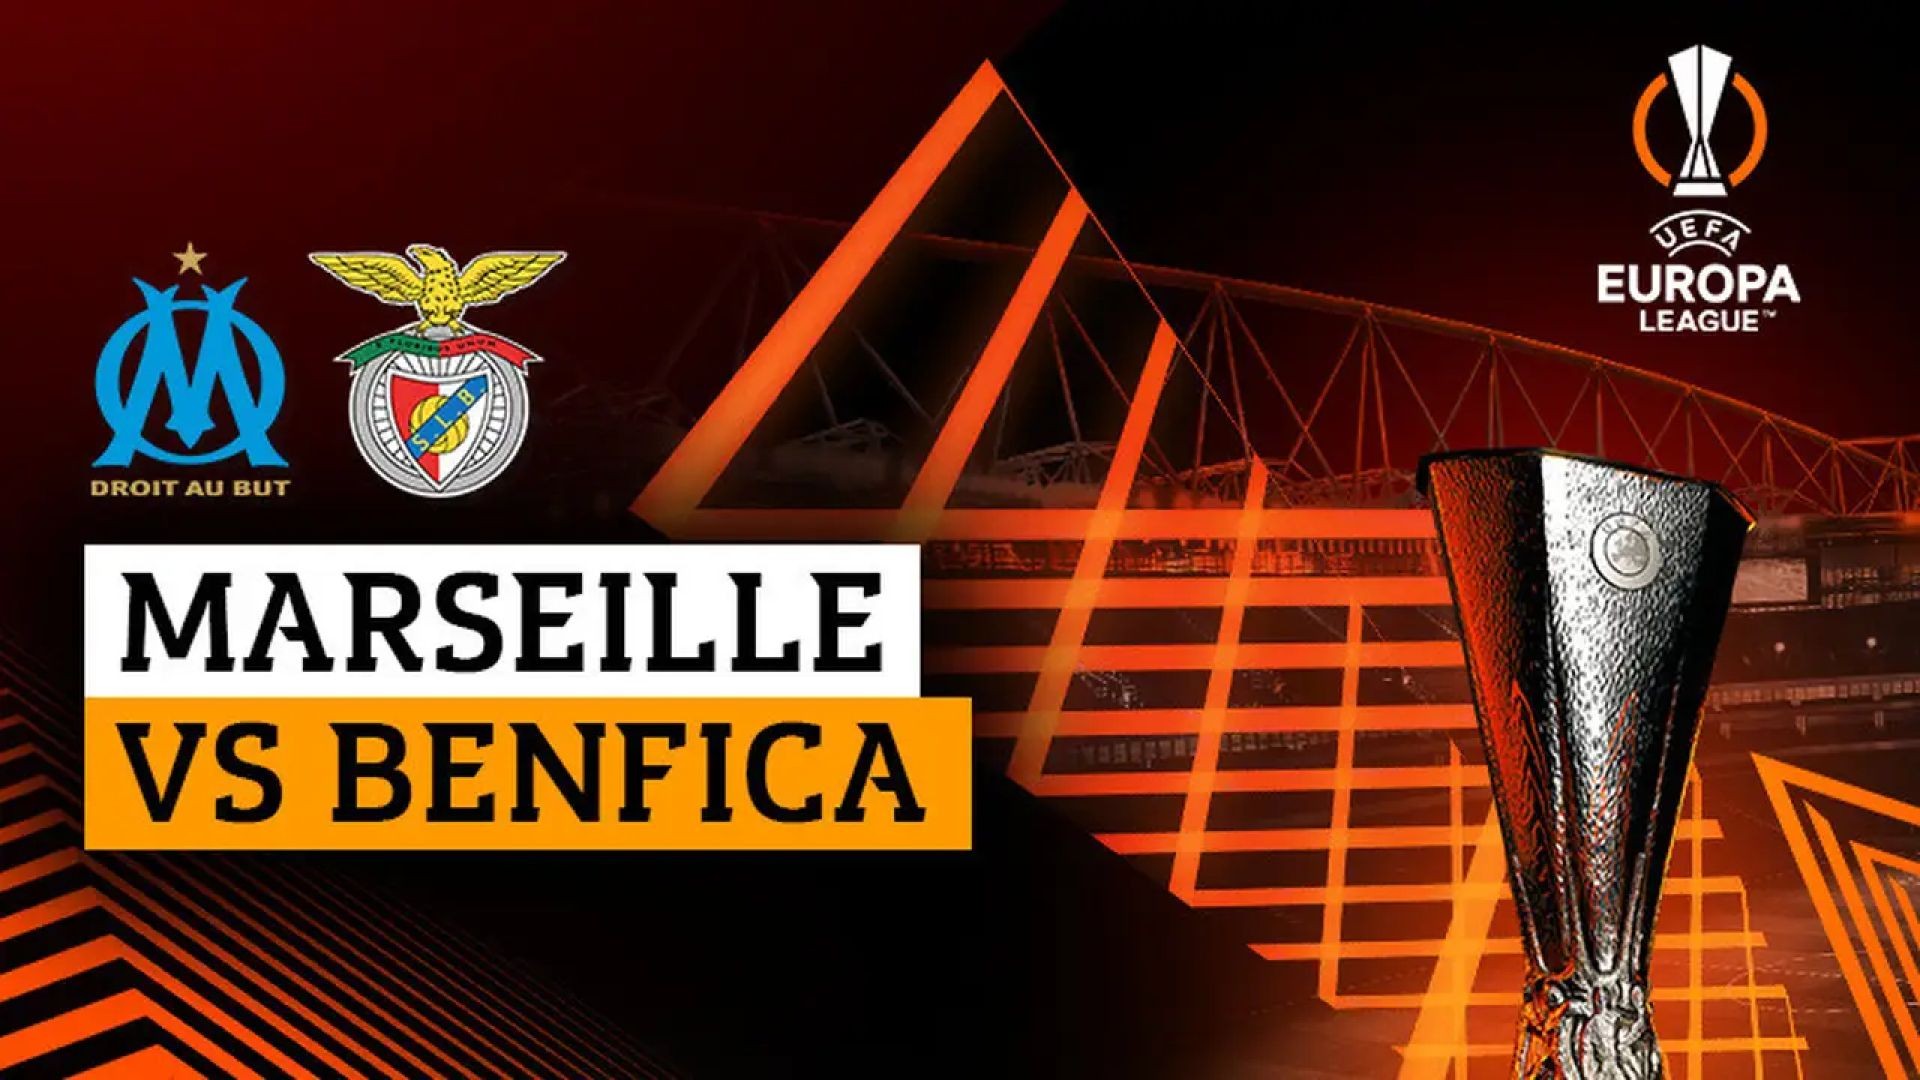 Marseille vs Benfica full match replay and highlights